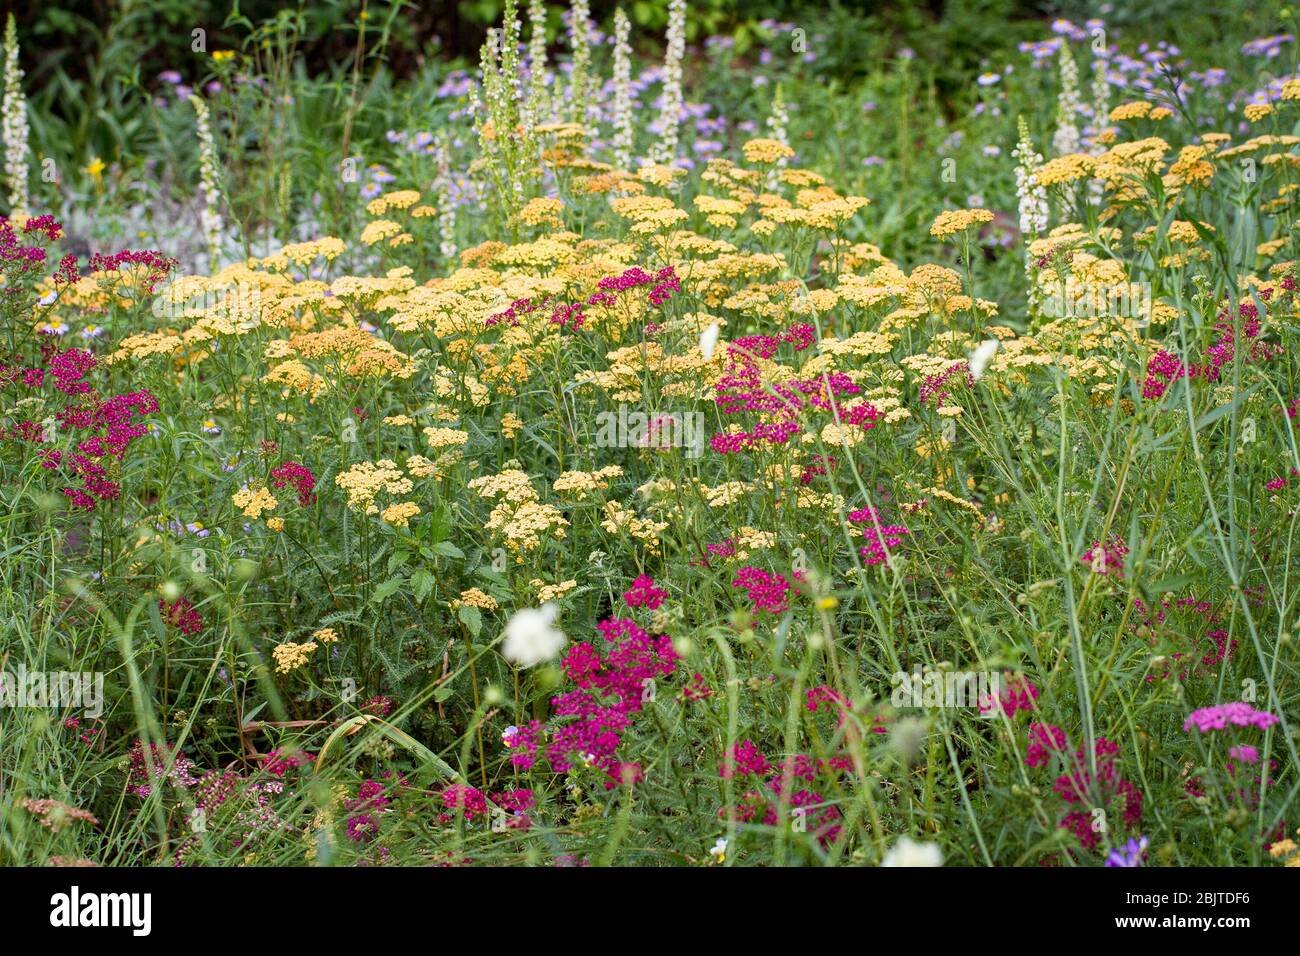 Several colors of yarrow growing in a field at the Flagstaff Arboretum in Northern Arizona. Stock Photo